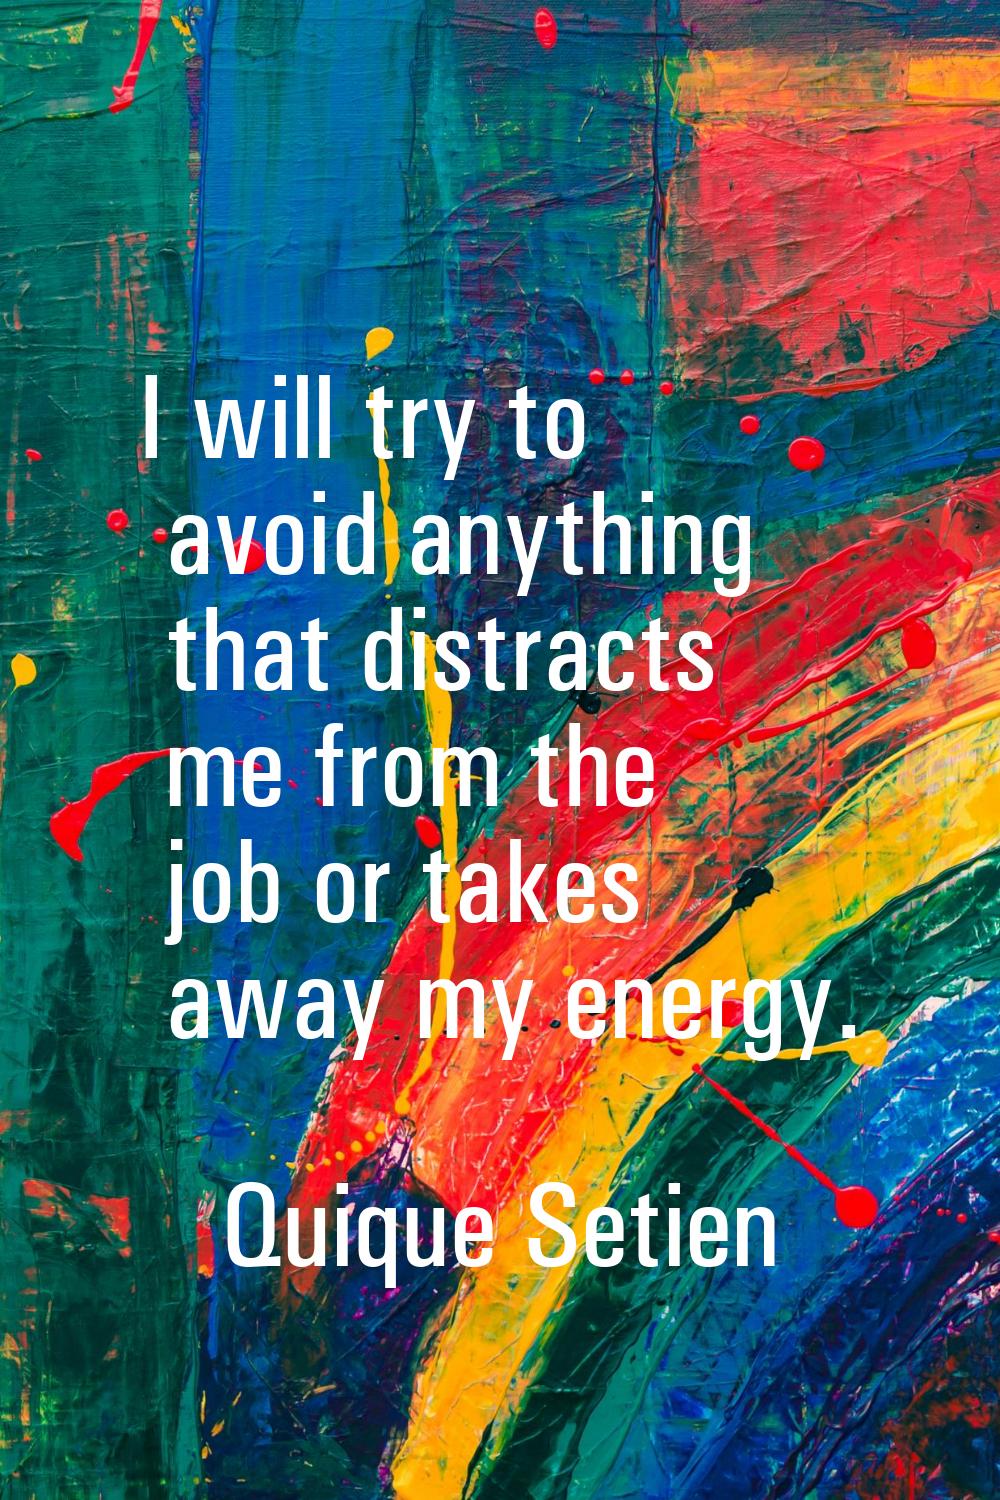 I will try to avoid anything that distracts me from the job or takes away my energy.